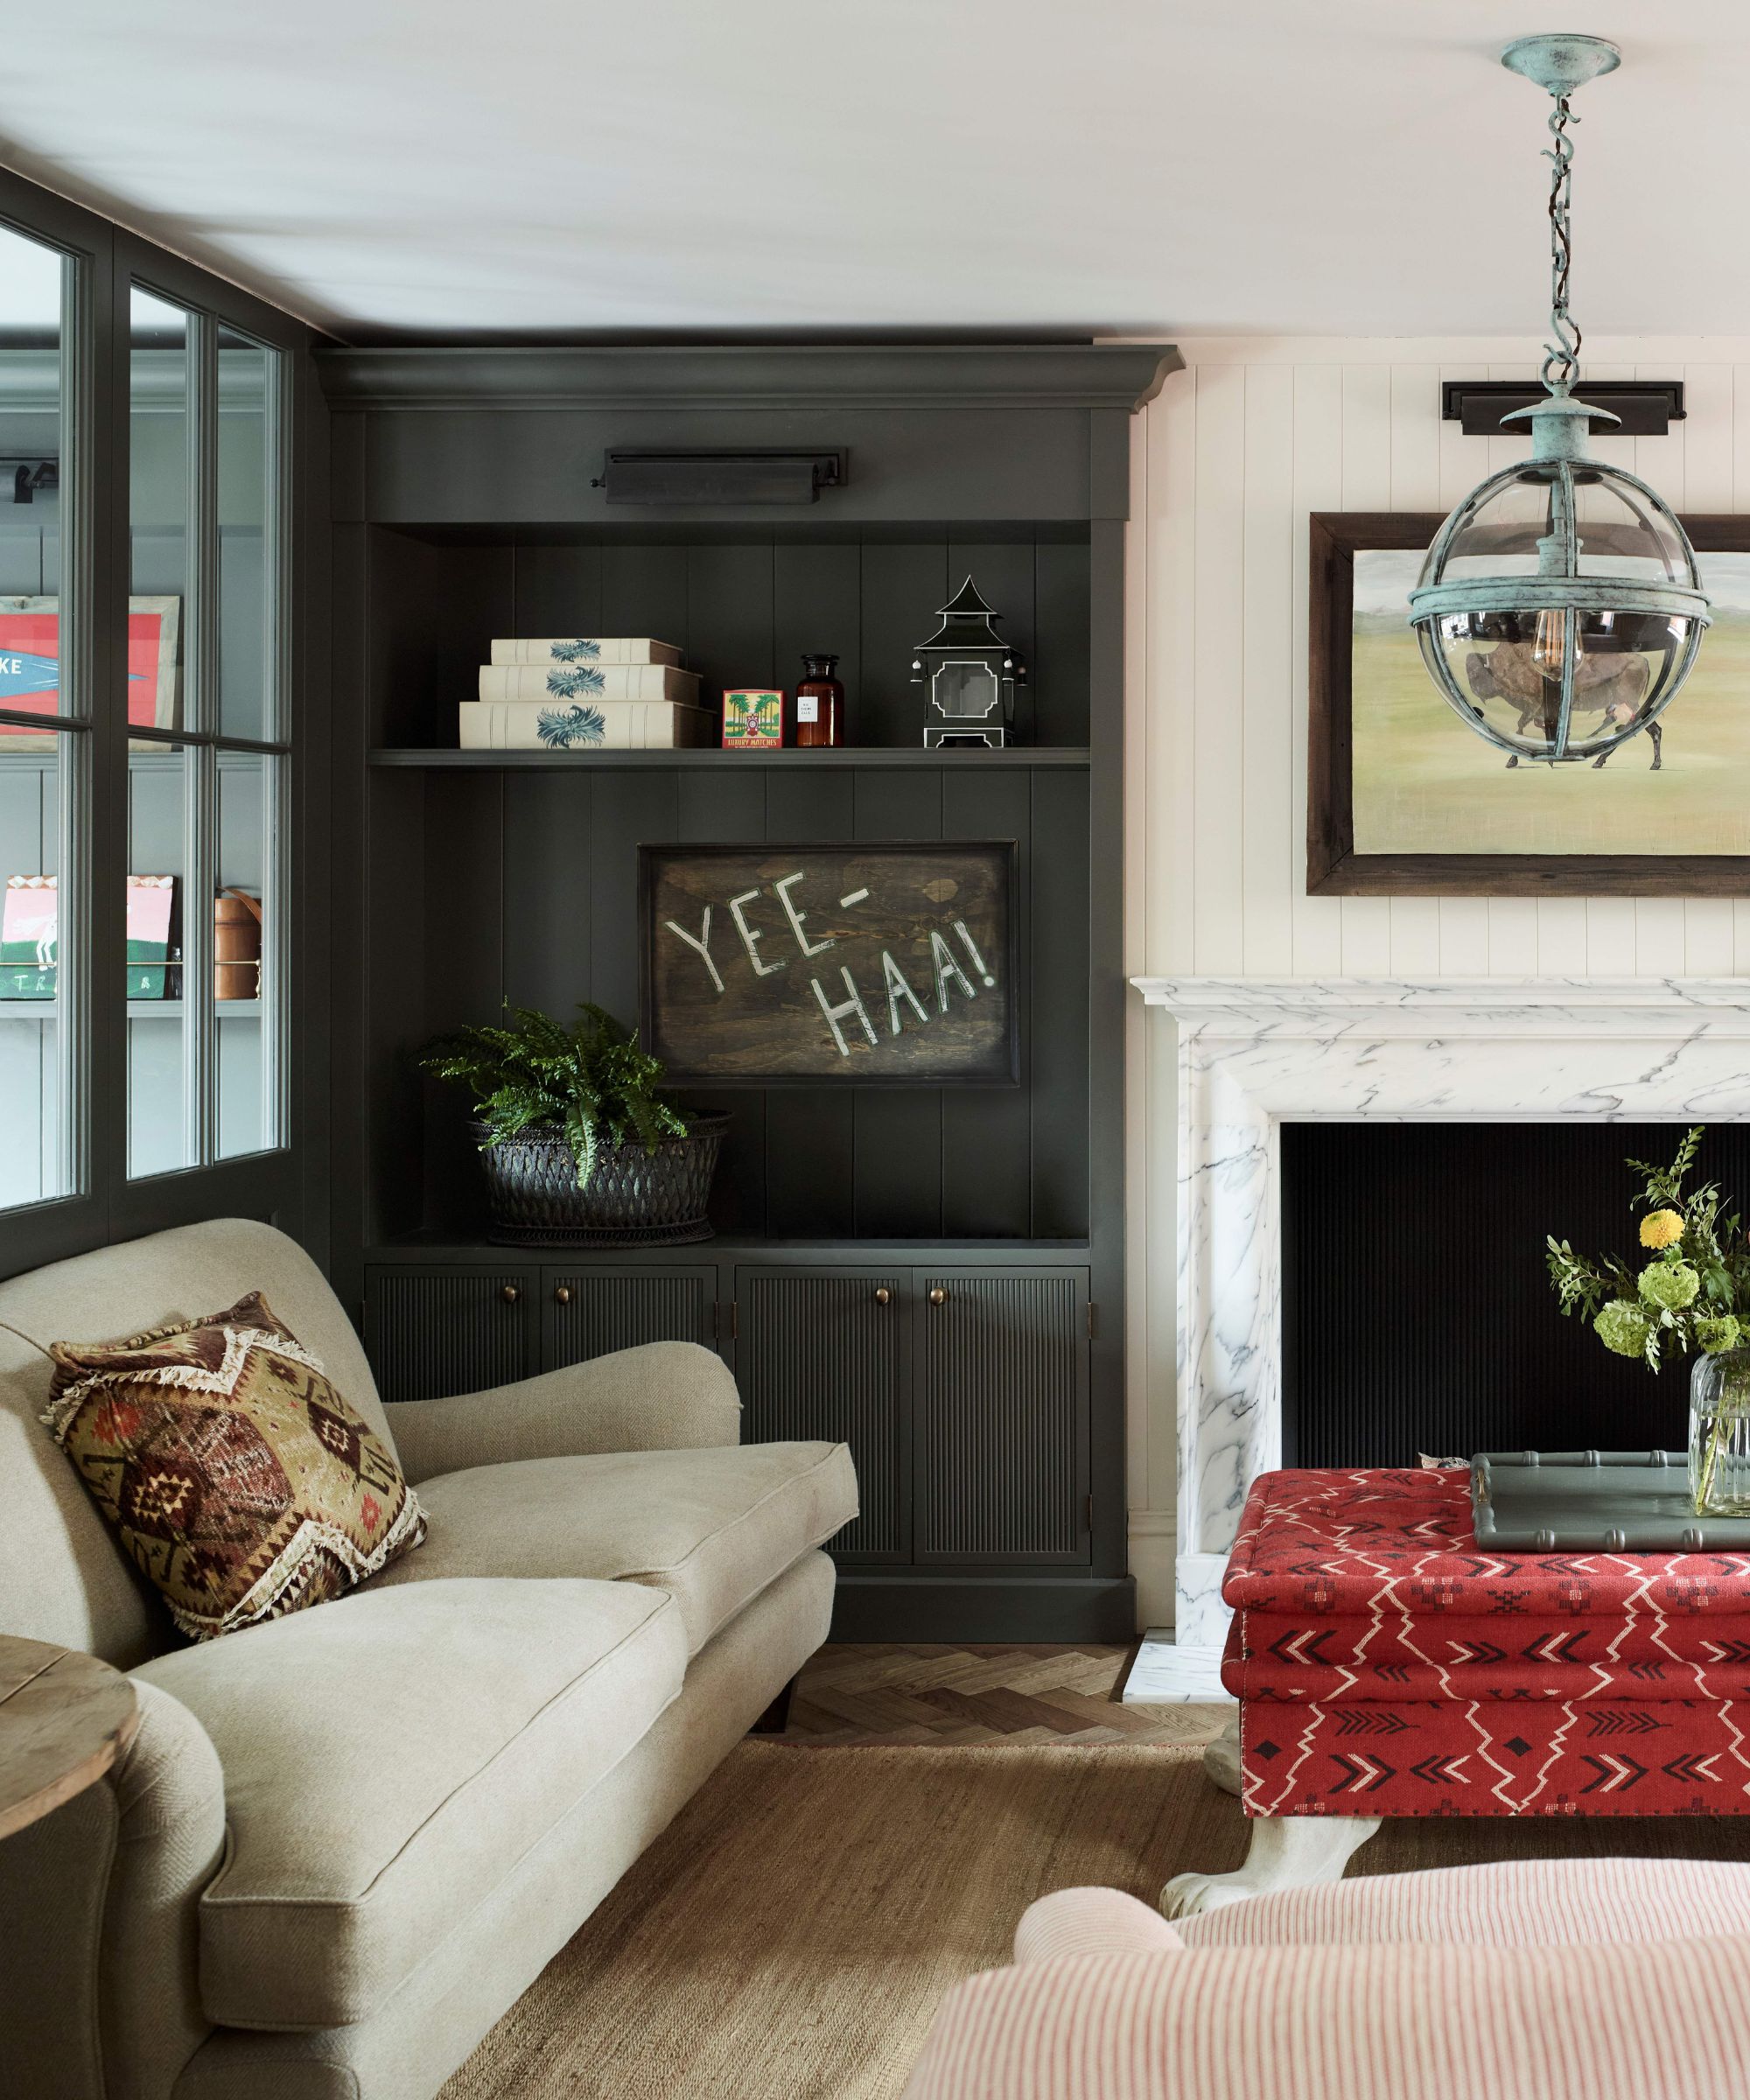 Living room with grey alcoves and dark red ottoman